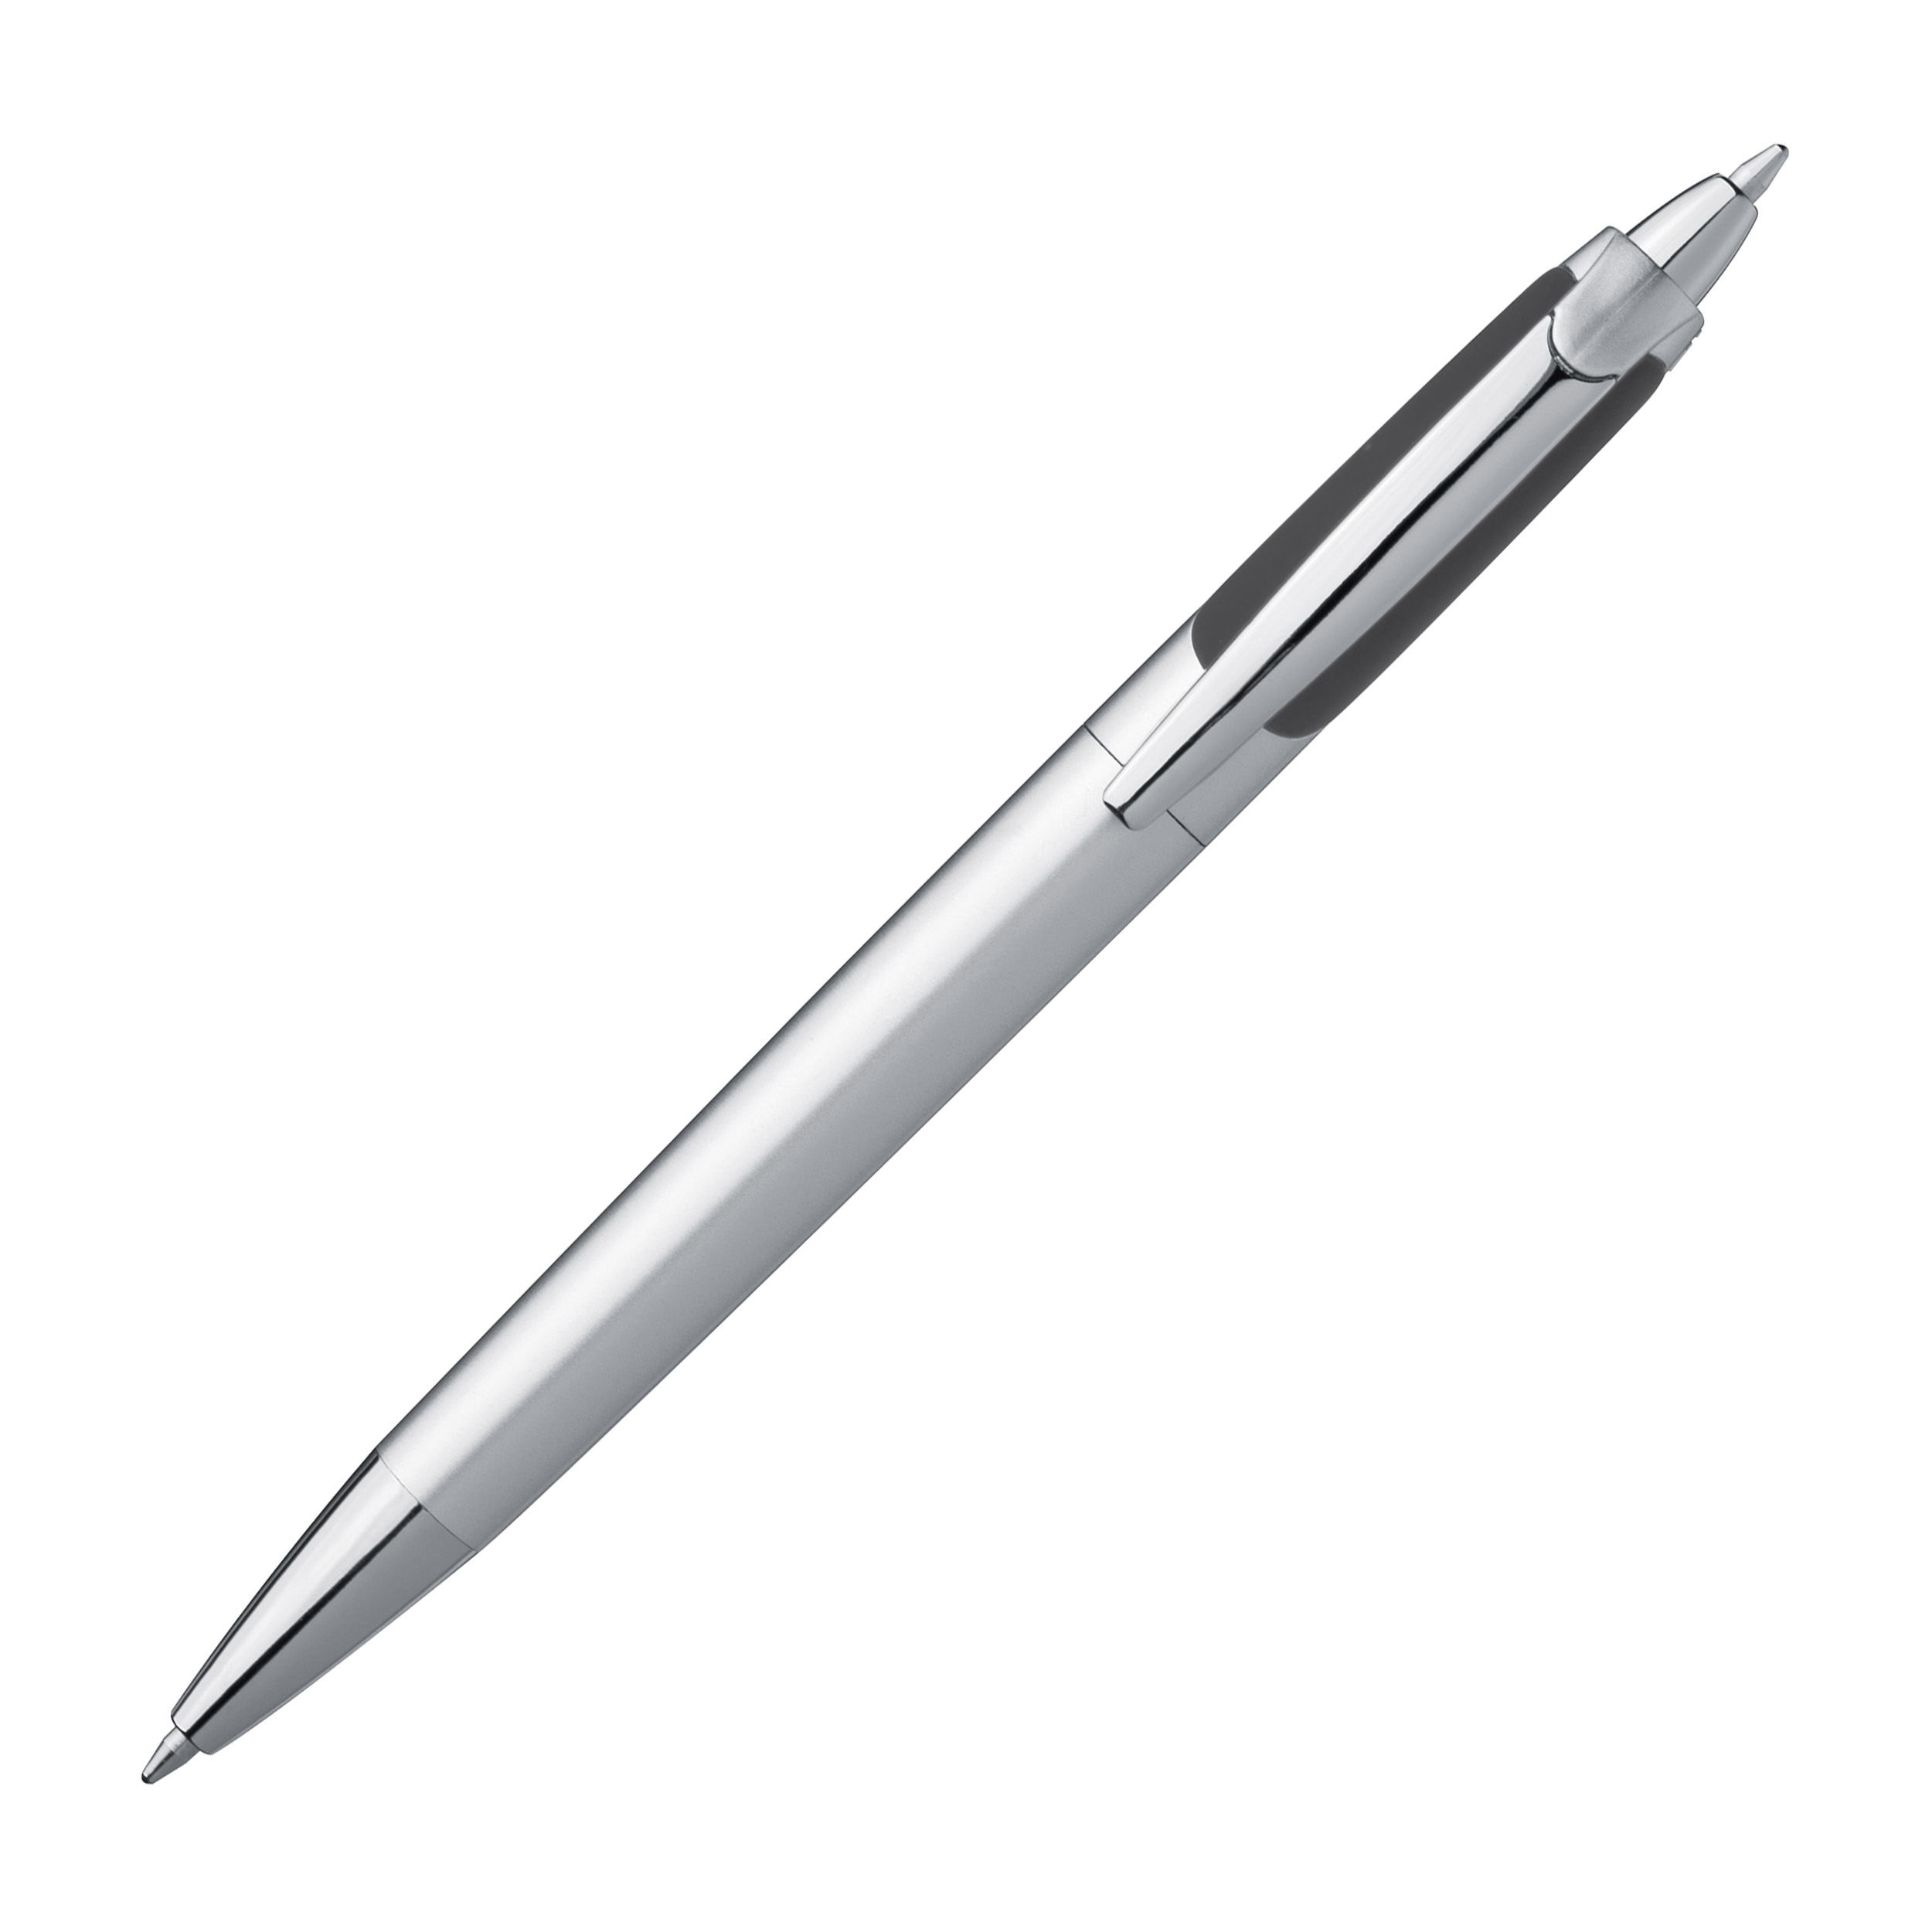 Ball pen with two writing sides